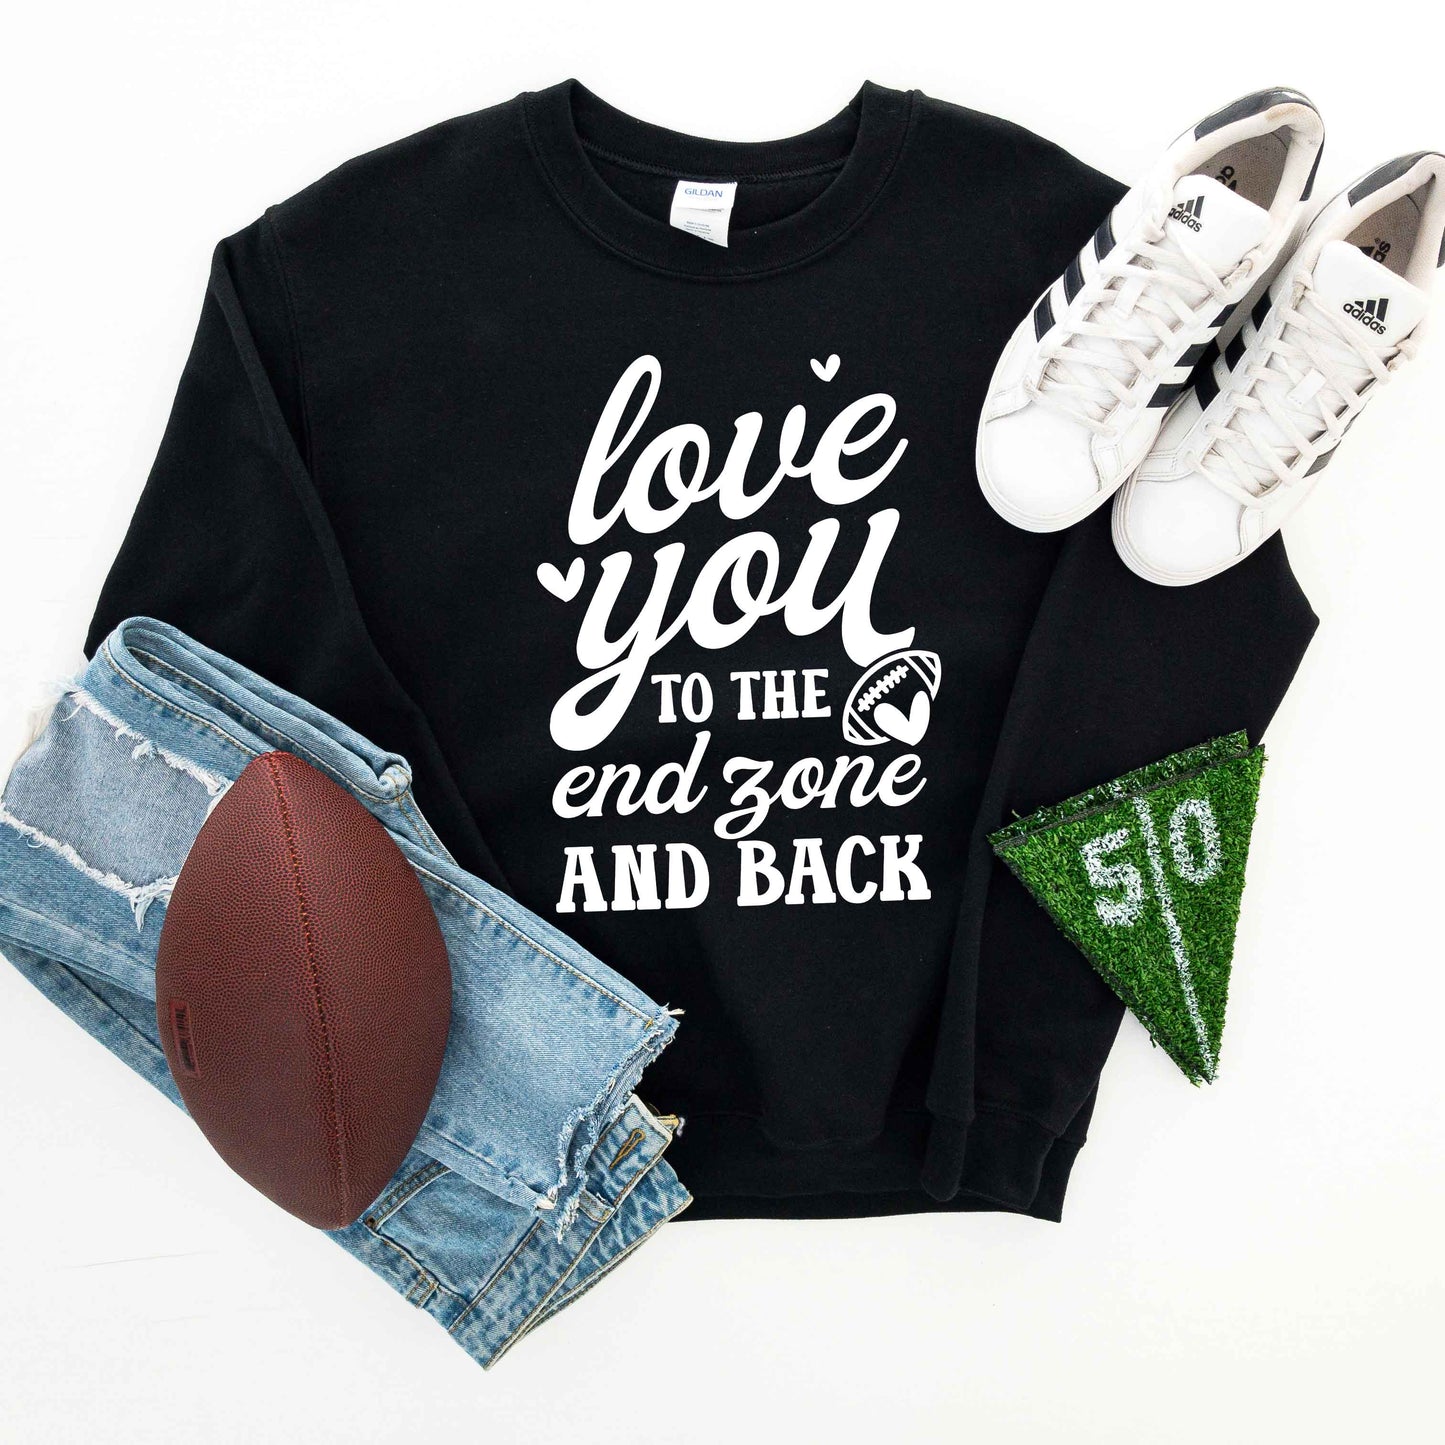 To The End Zone And Back | Sweatshirt